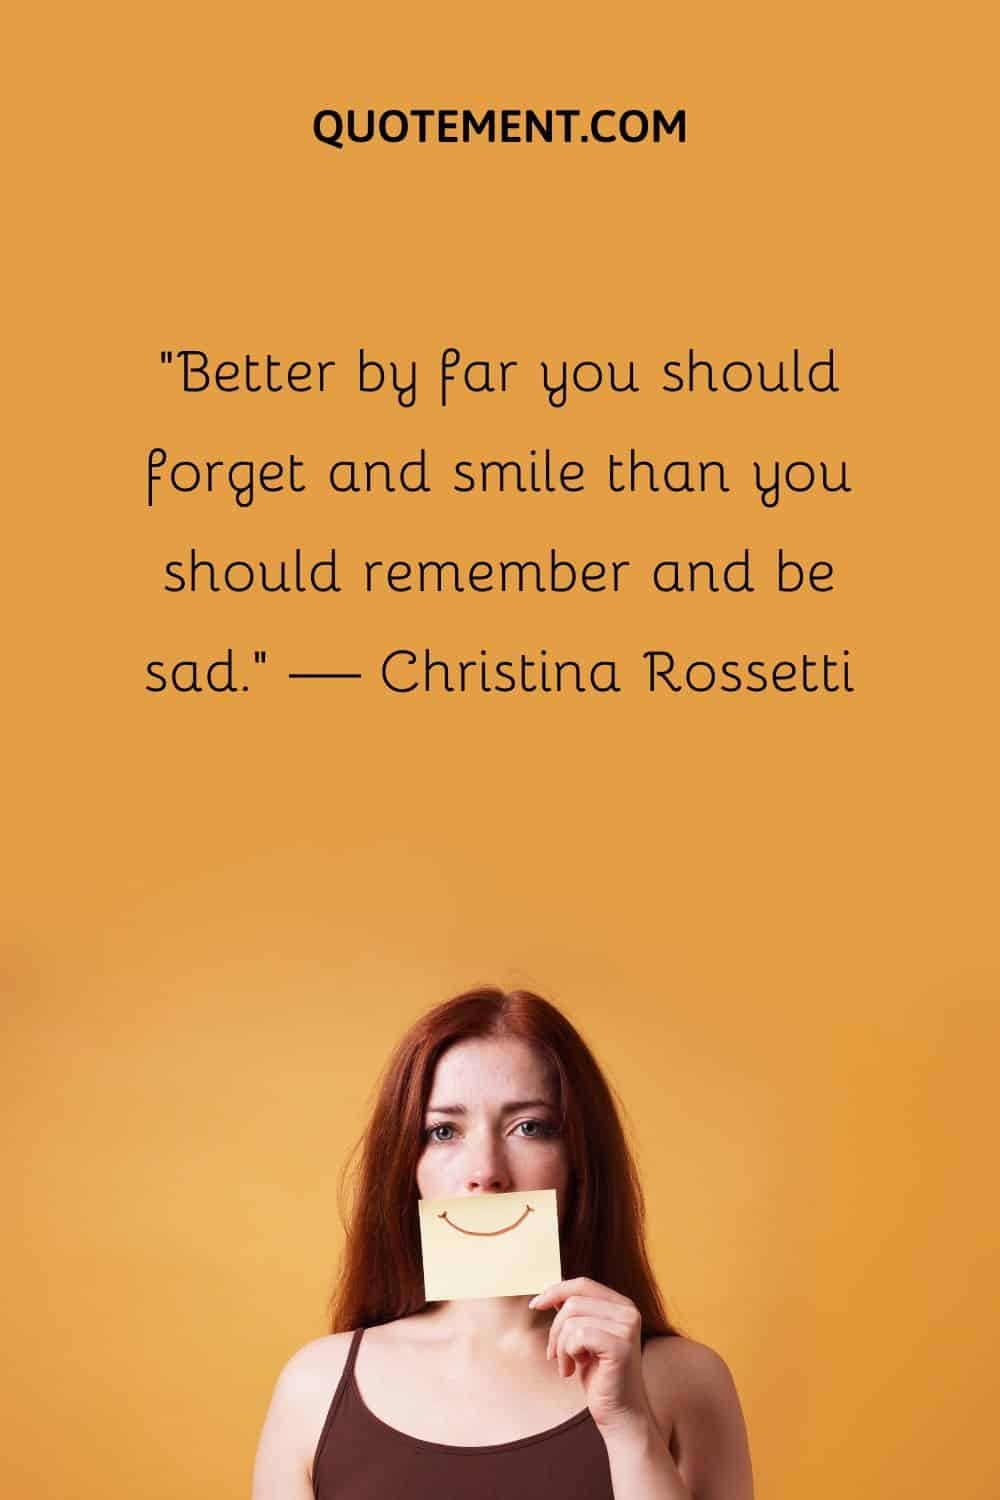 Better by far you should forget and smile than you should remember and be sad.